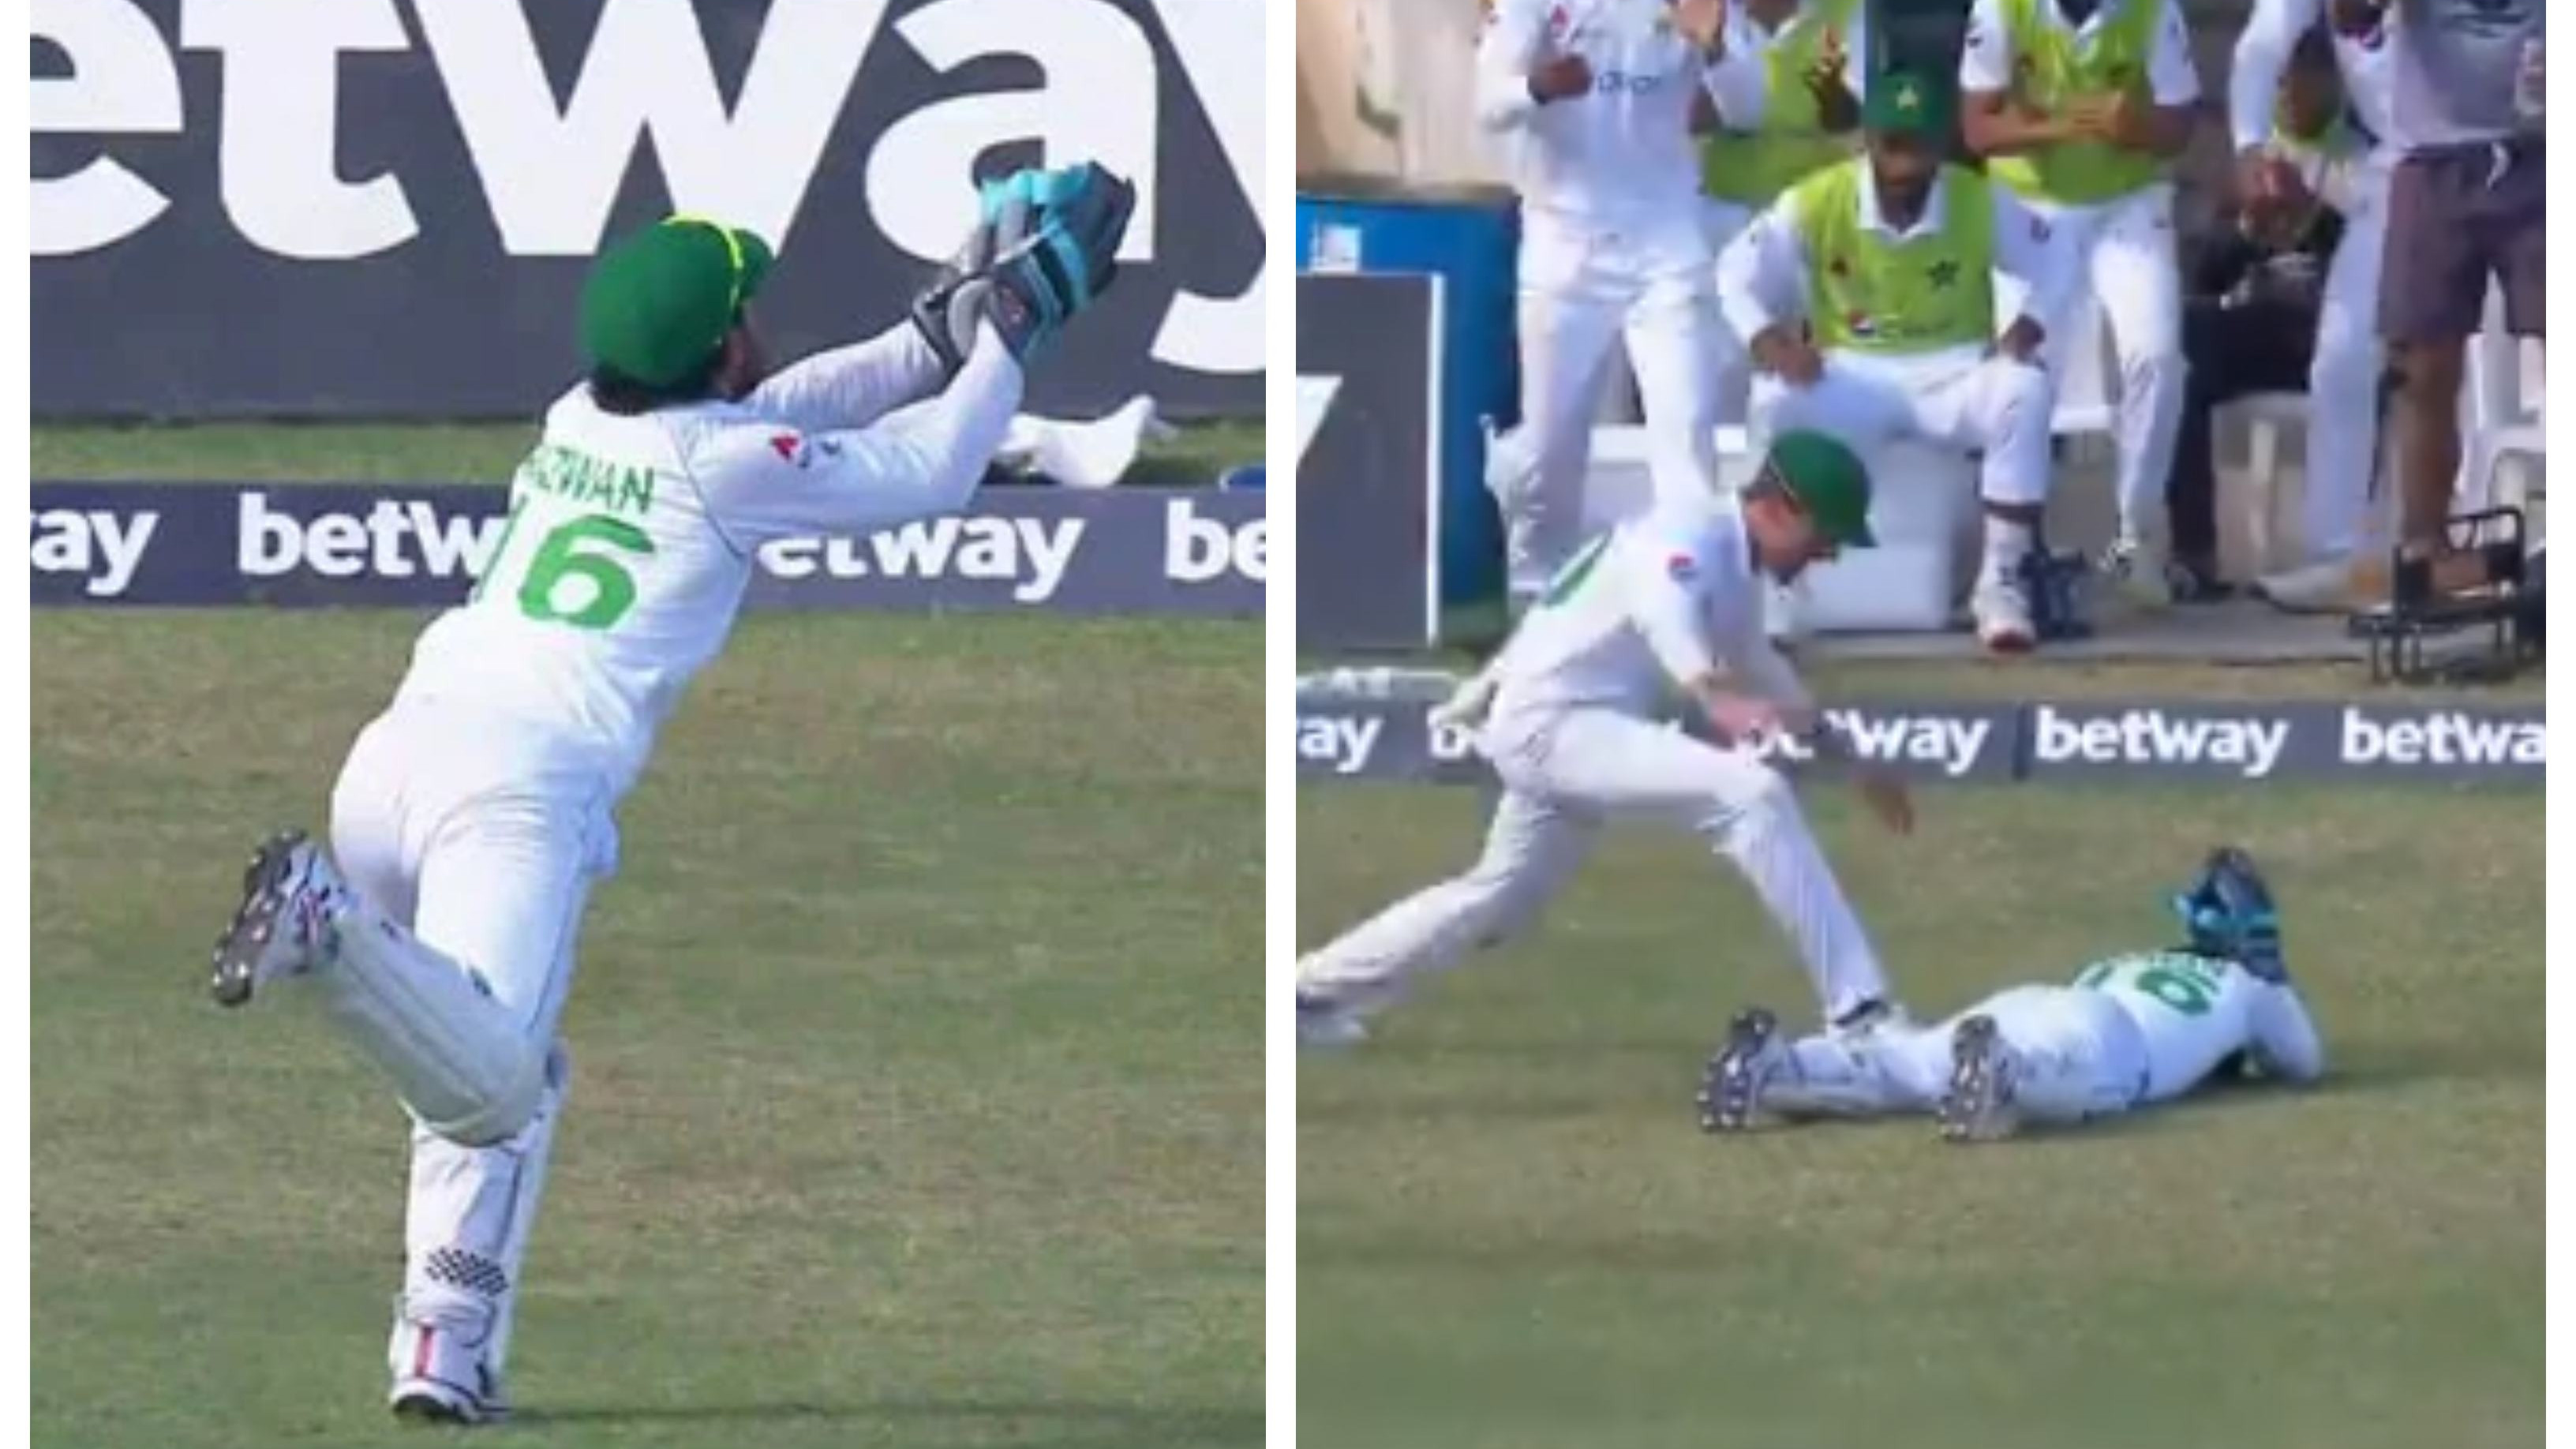 WI v PAK 2021: WATCH – Mohammad Rizwan sprints back and takes an insane catch during first Test